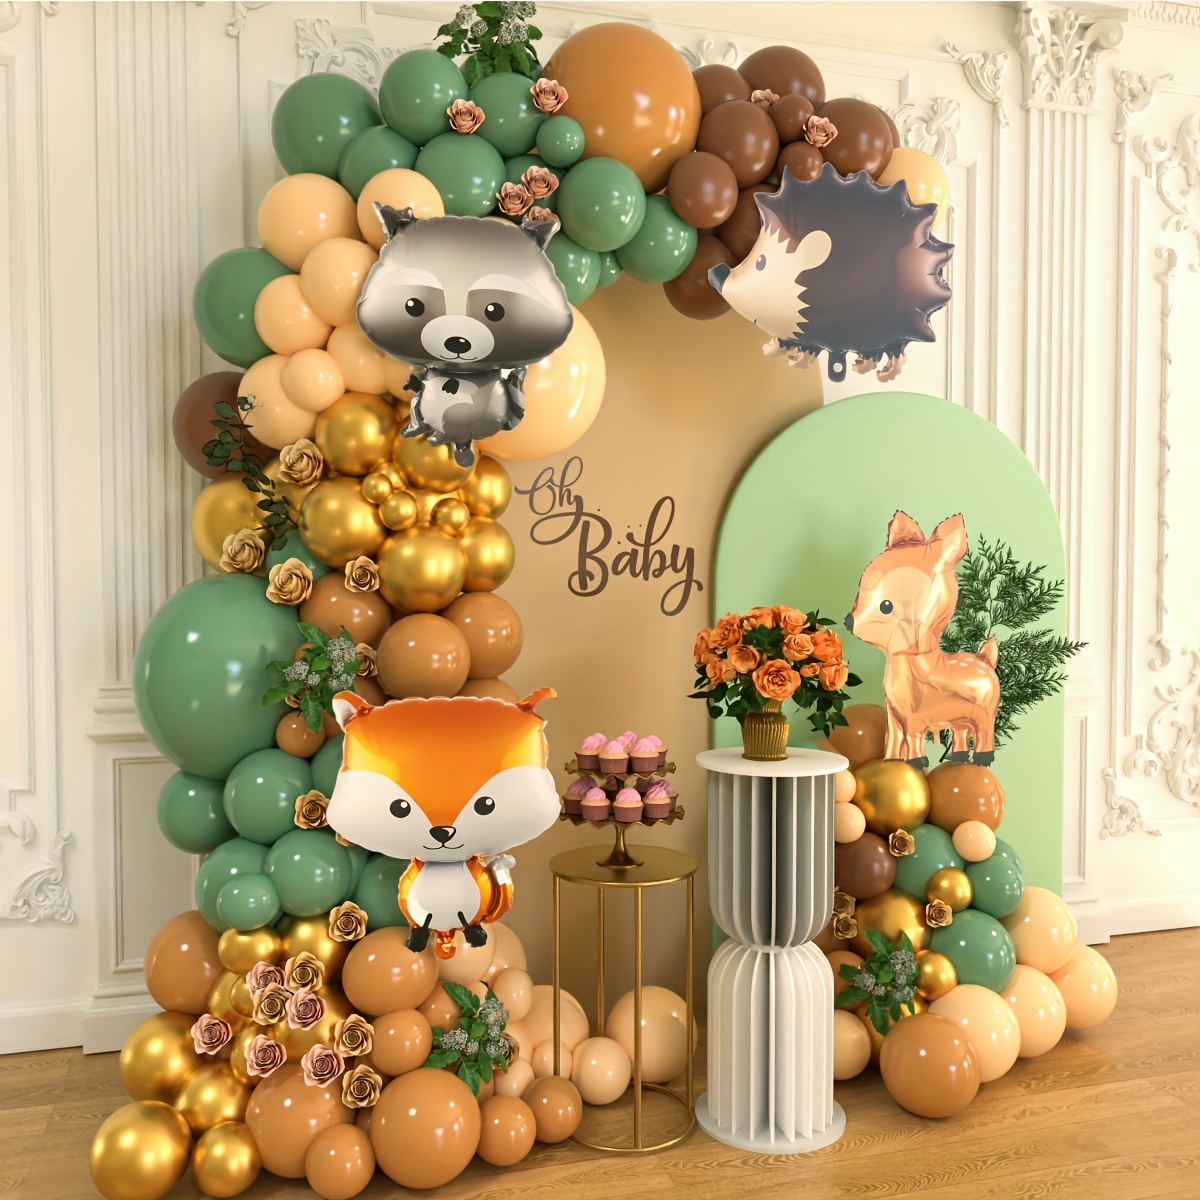 

119pcs Woodland Animal Themed Party Balloons Set With Fox, Hedgehog, Deer, Raccoon Foil Balloons - Christmas, Halloween, Birthday Party Universal Decor Kit, Suitable For Ages 14+